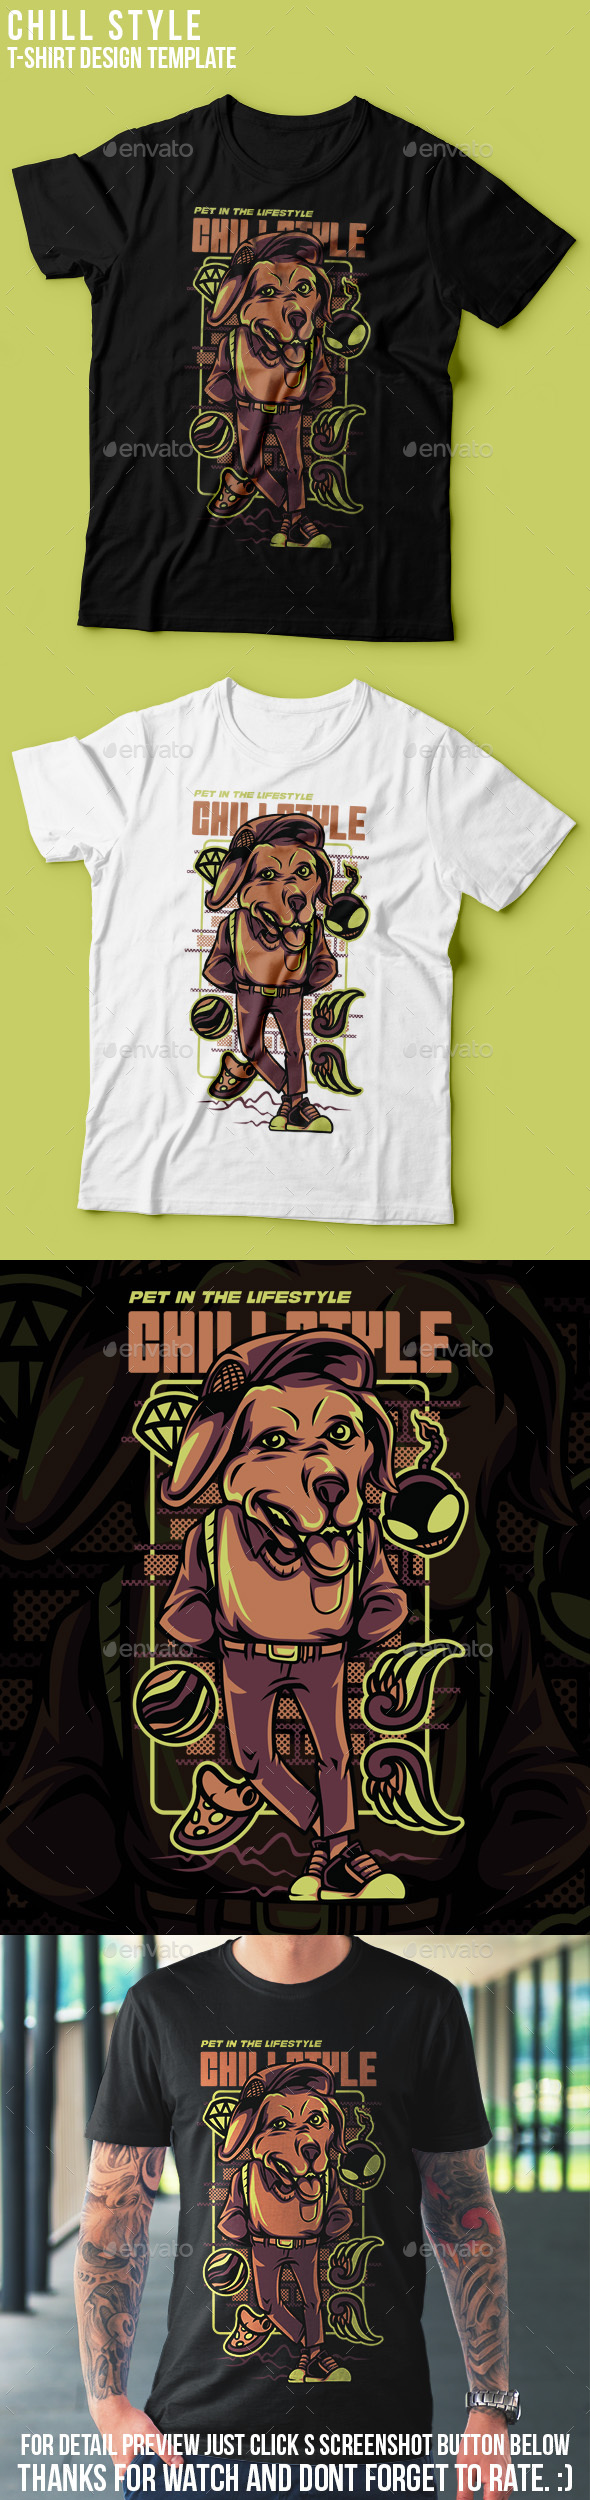 Chill Style T-Shirt Design